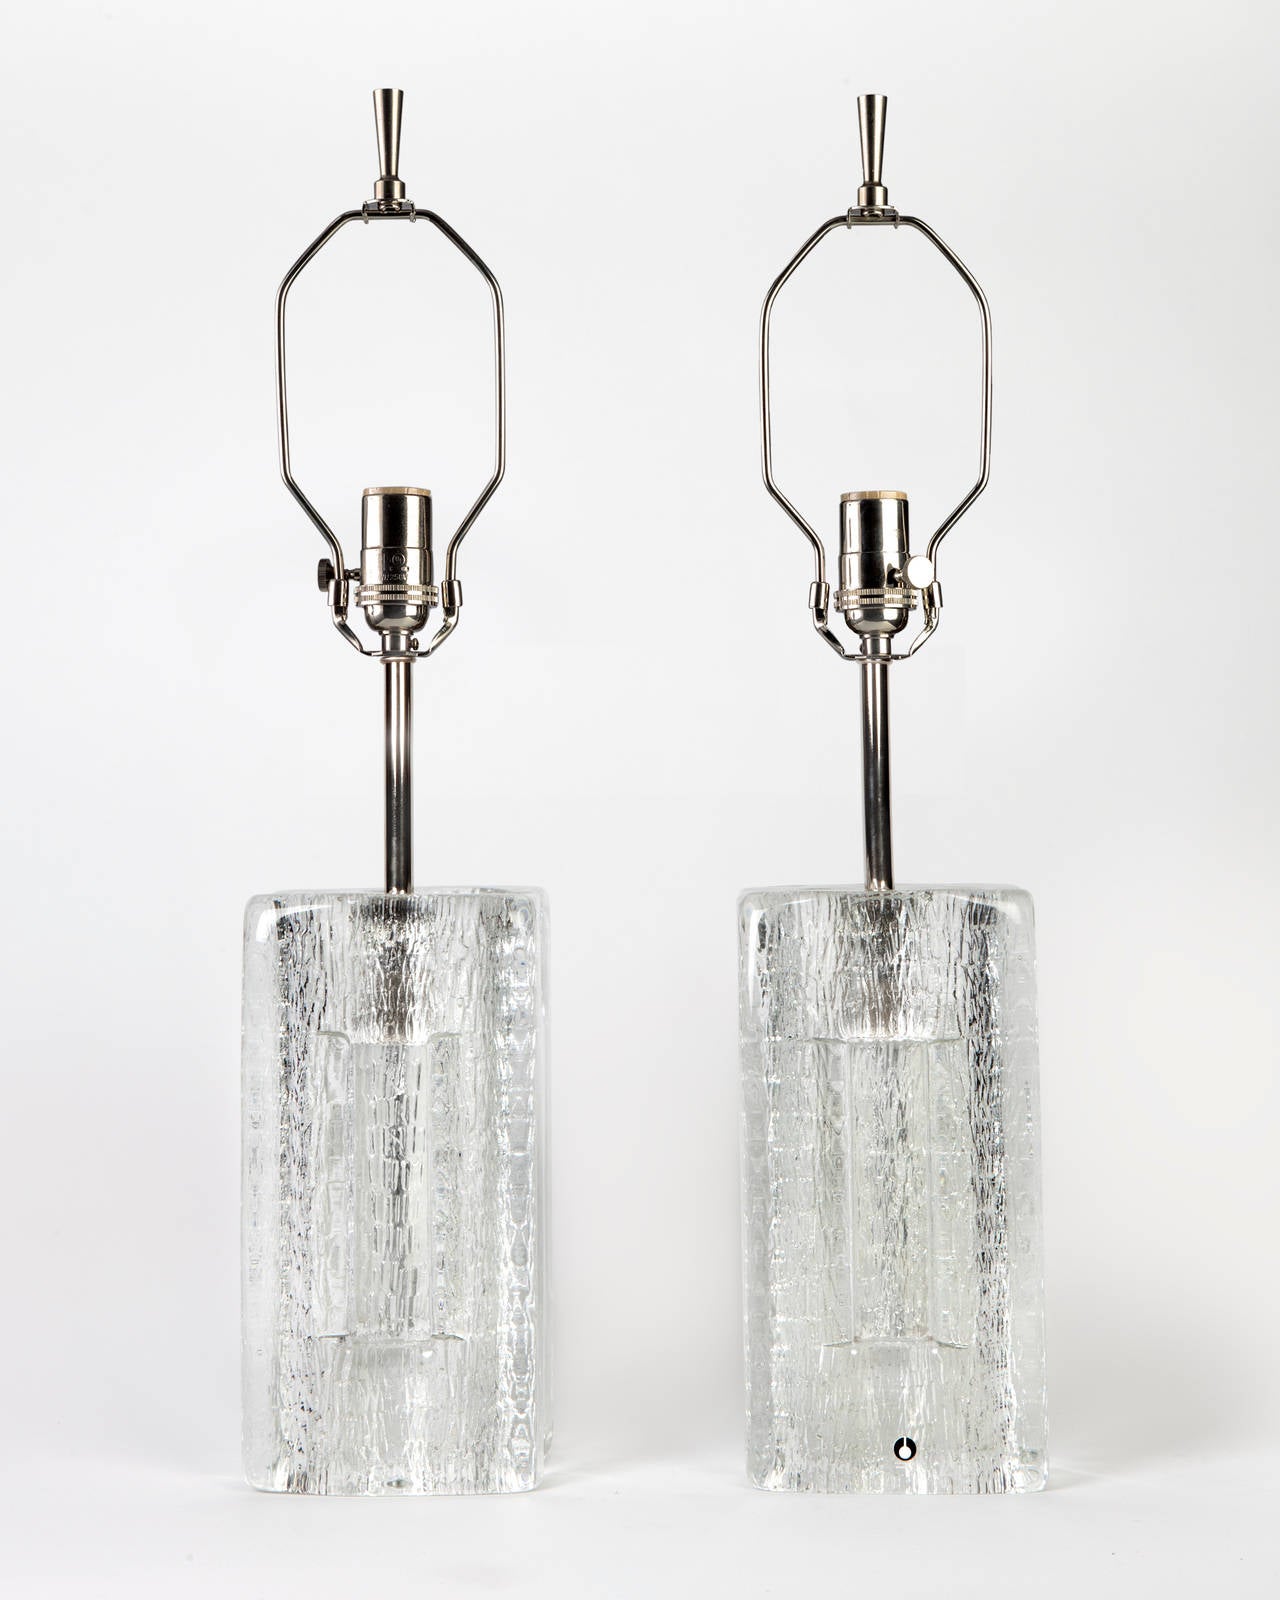 ATL:1896

A pair of textured cast glass lamps formed by two solid T-shapes connected in the middle. Having nickel fittings. Signed by the Swedish maker Pukeberg. Due to the antique nature of this fixture, there may be some nicks or imperfections